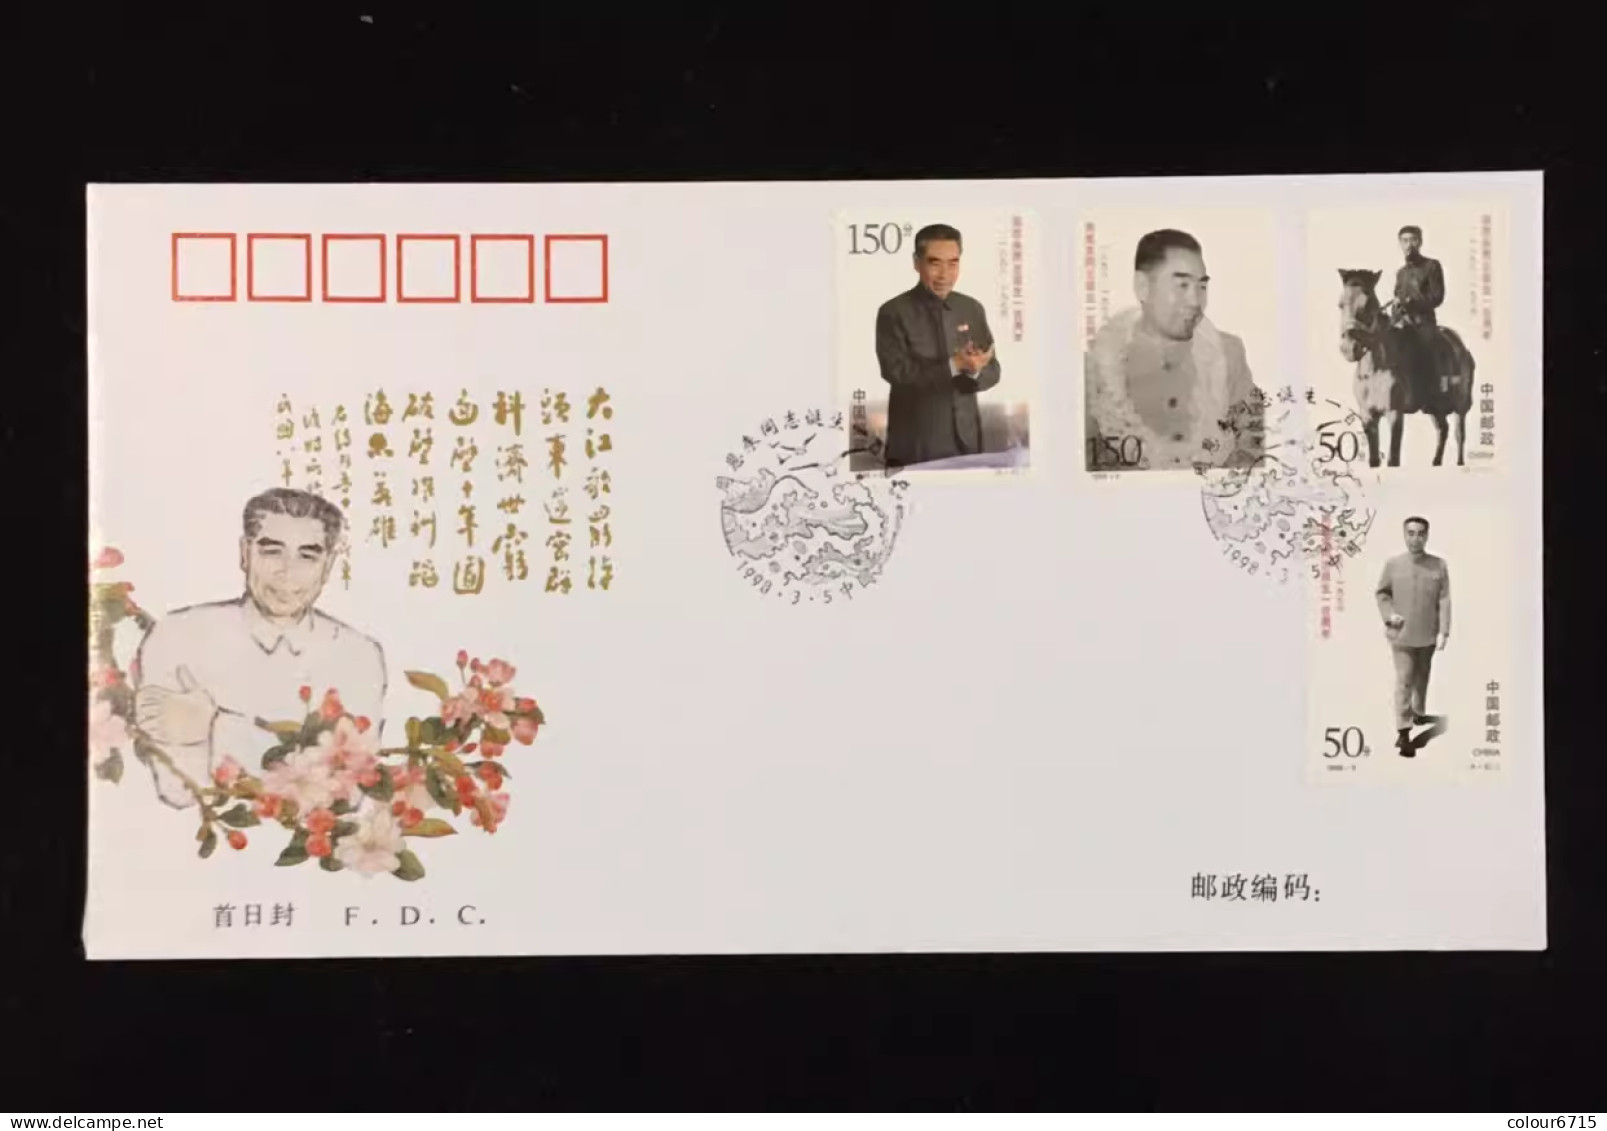 China FDC/1998-5 The 100th Anniversary Of The Birth Of Zhou En-lai 1v MNH - 1990-1999